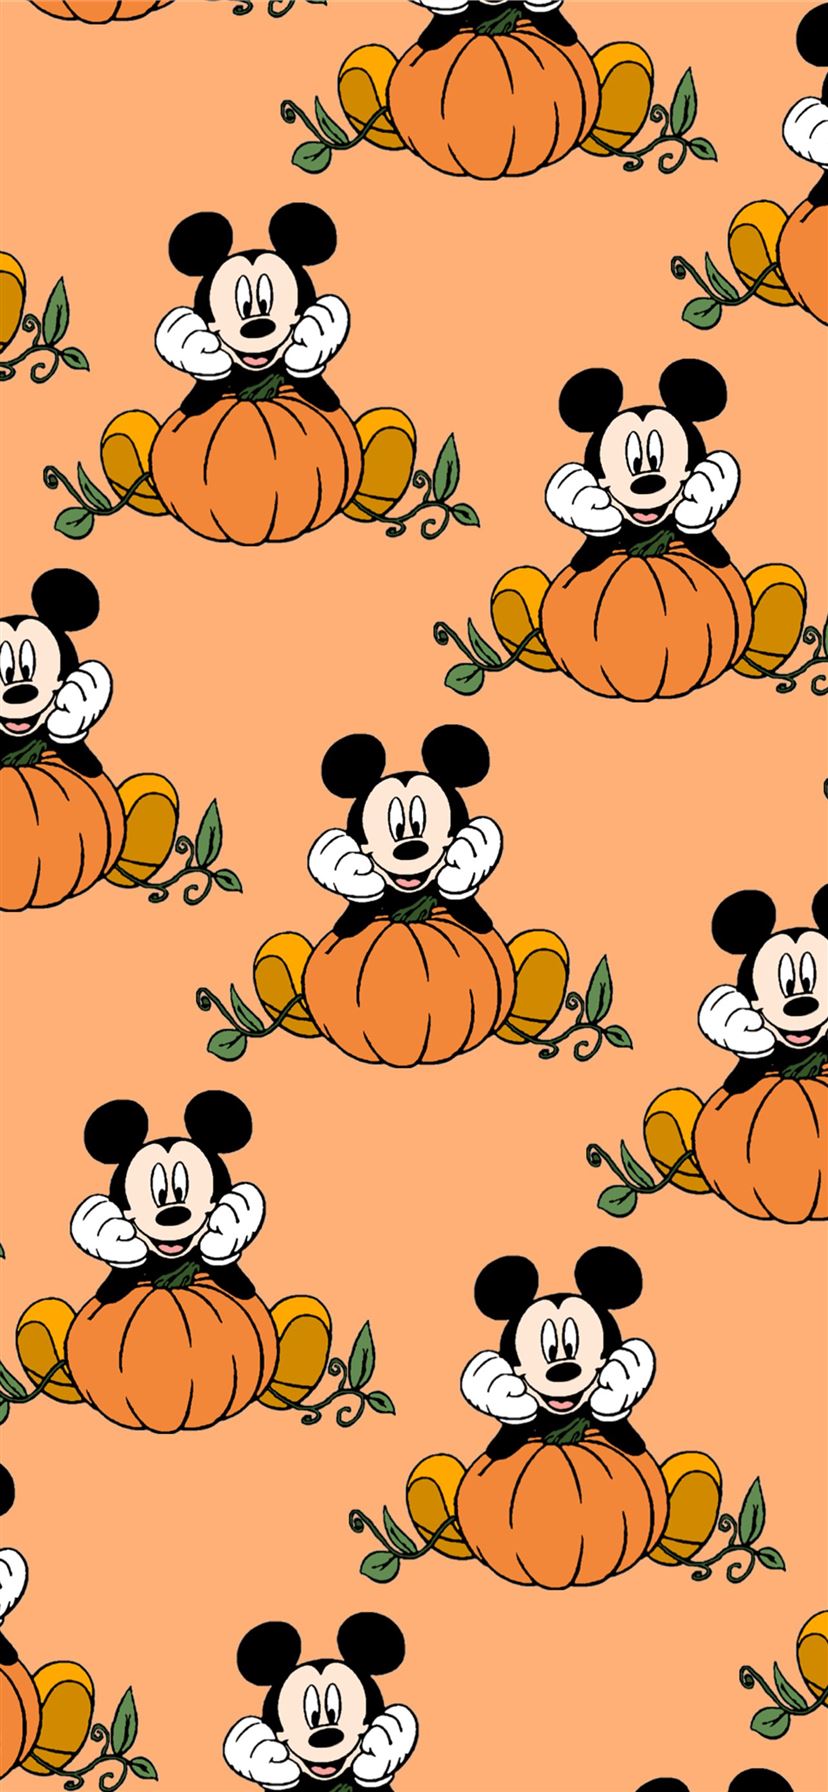 Mickey mouse and minnie mice on orange background - Thanksgiving